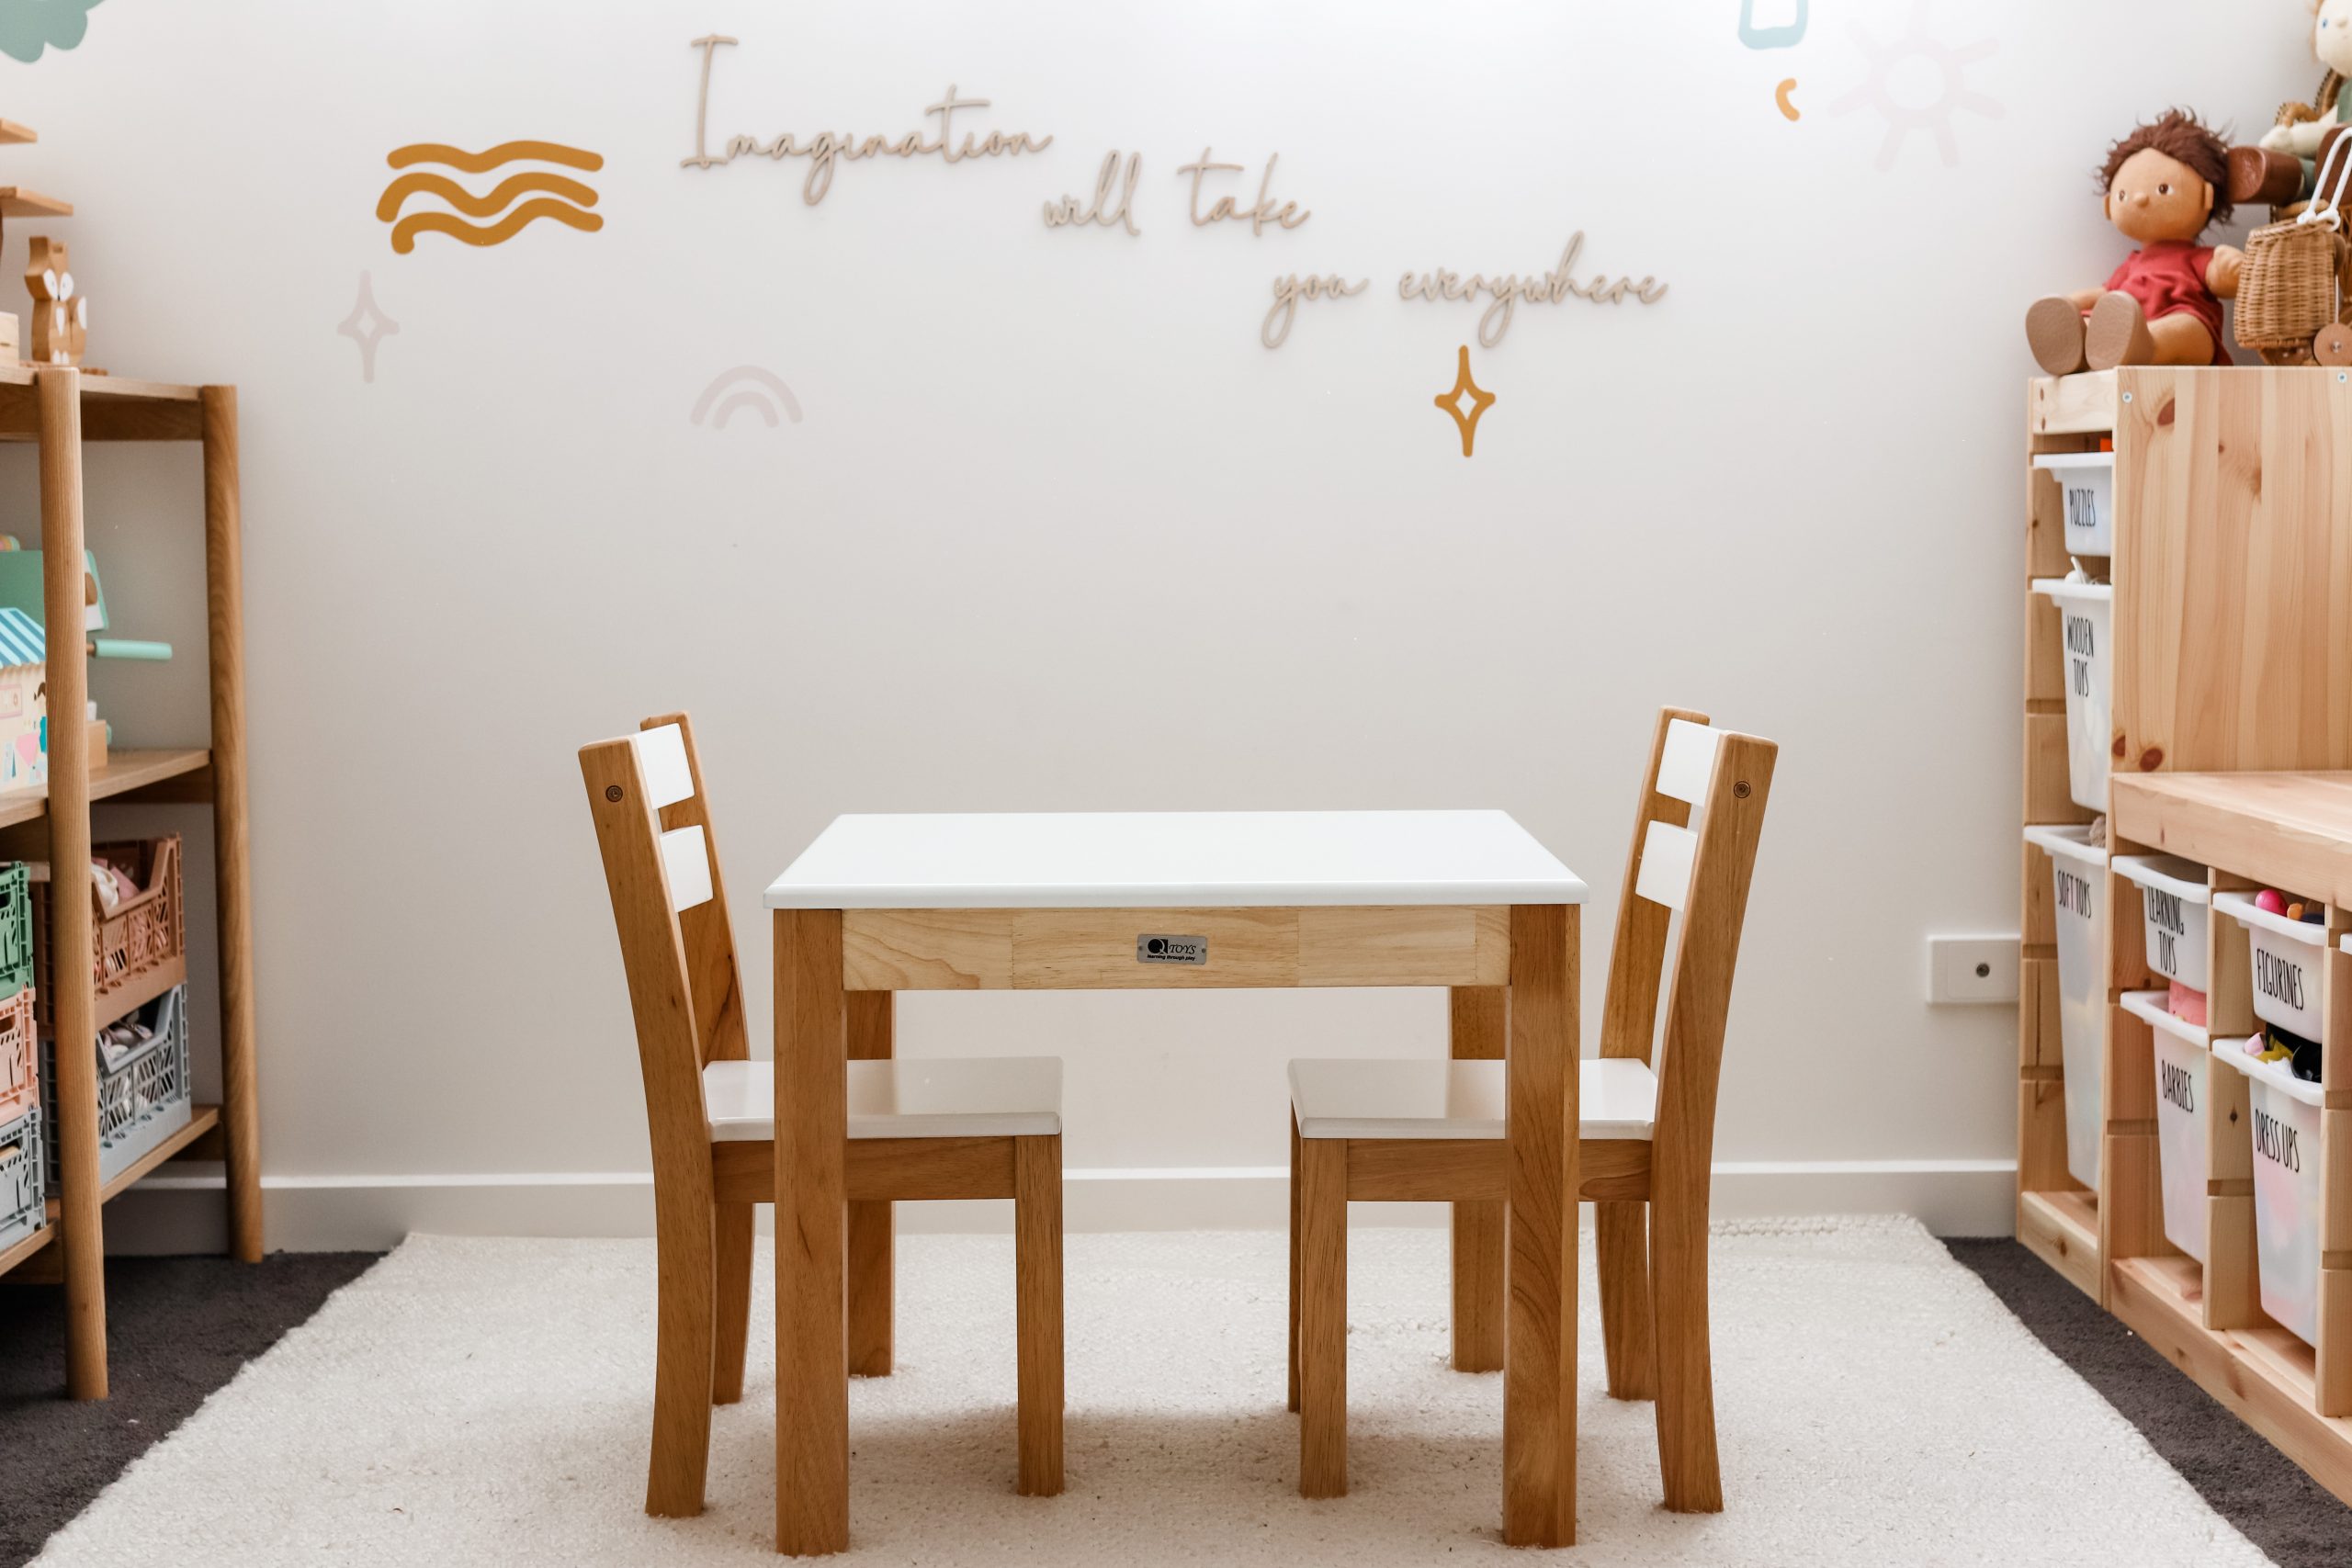 White Top Timber Table with 2 Matching Chairs